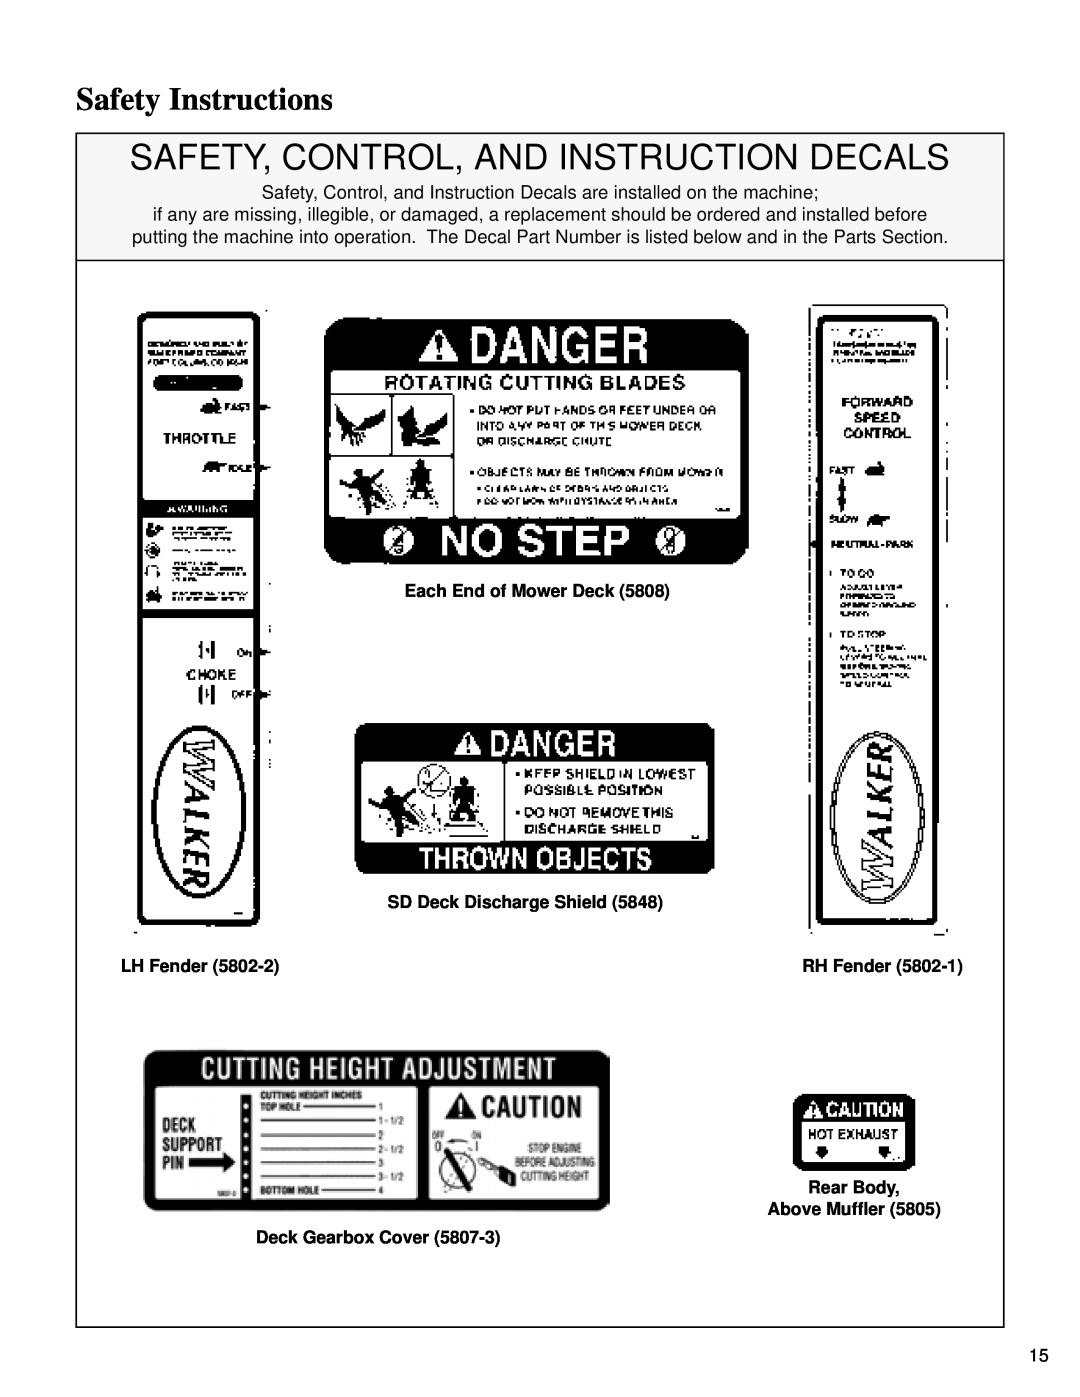 Briggs & Stratton MB (18 HP) owner manual Safety, Control, And Instruction Decals, Safety Instructions 